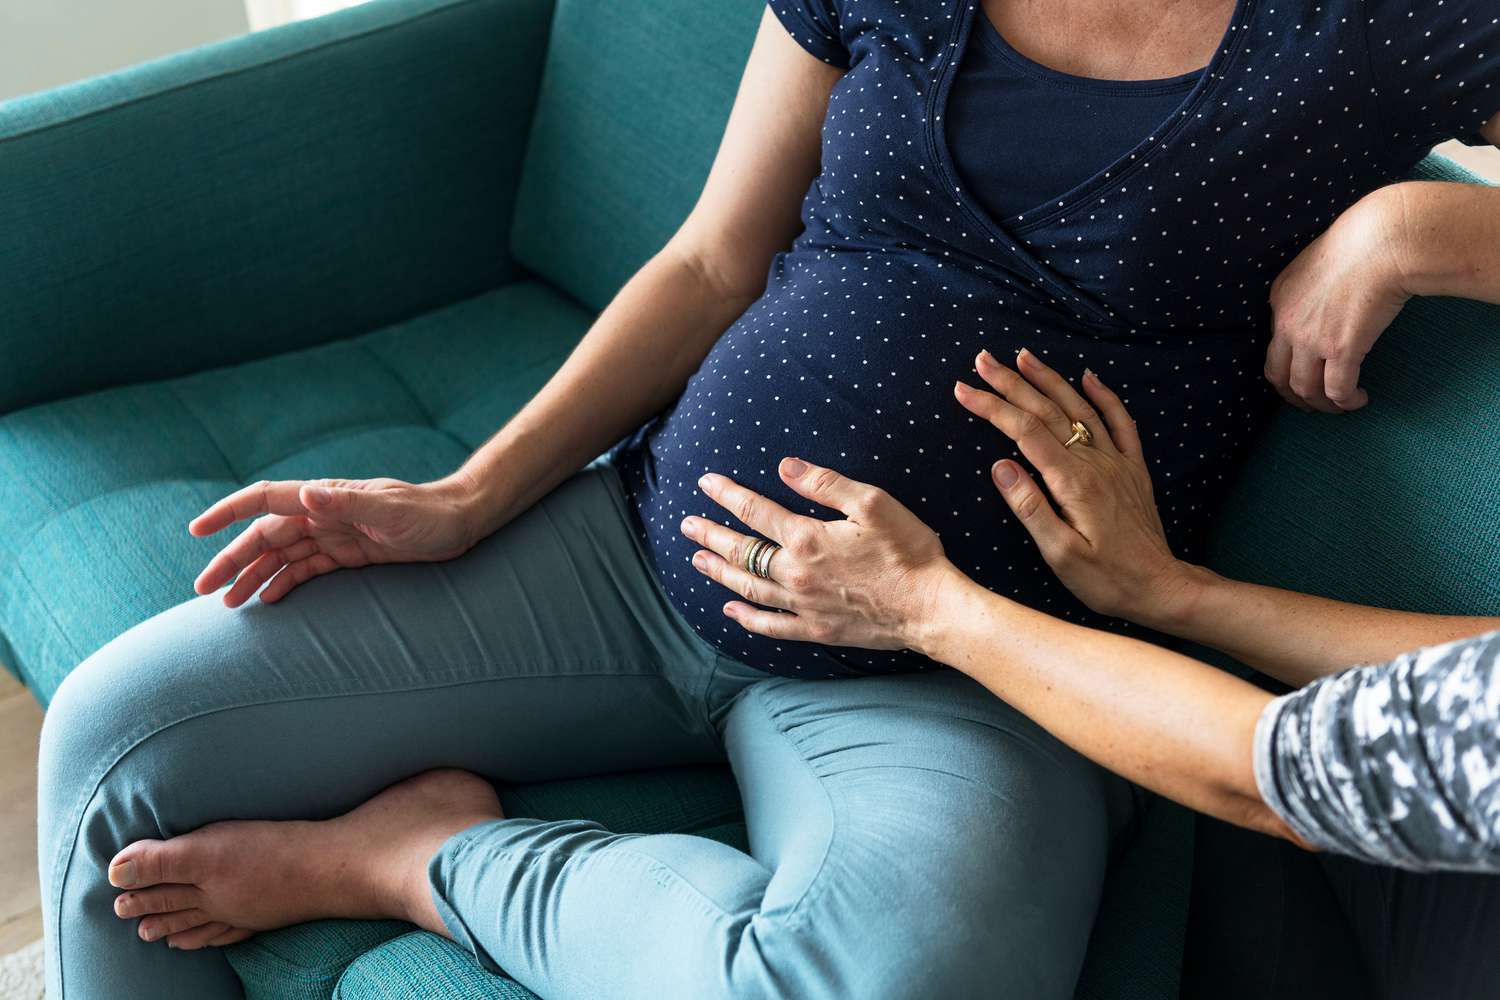 Pregnant Woman on Couch and Hands On Belly